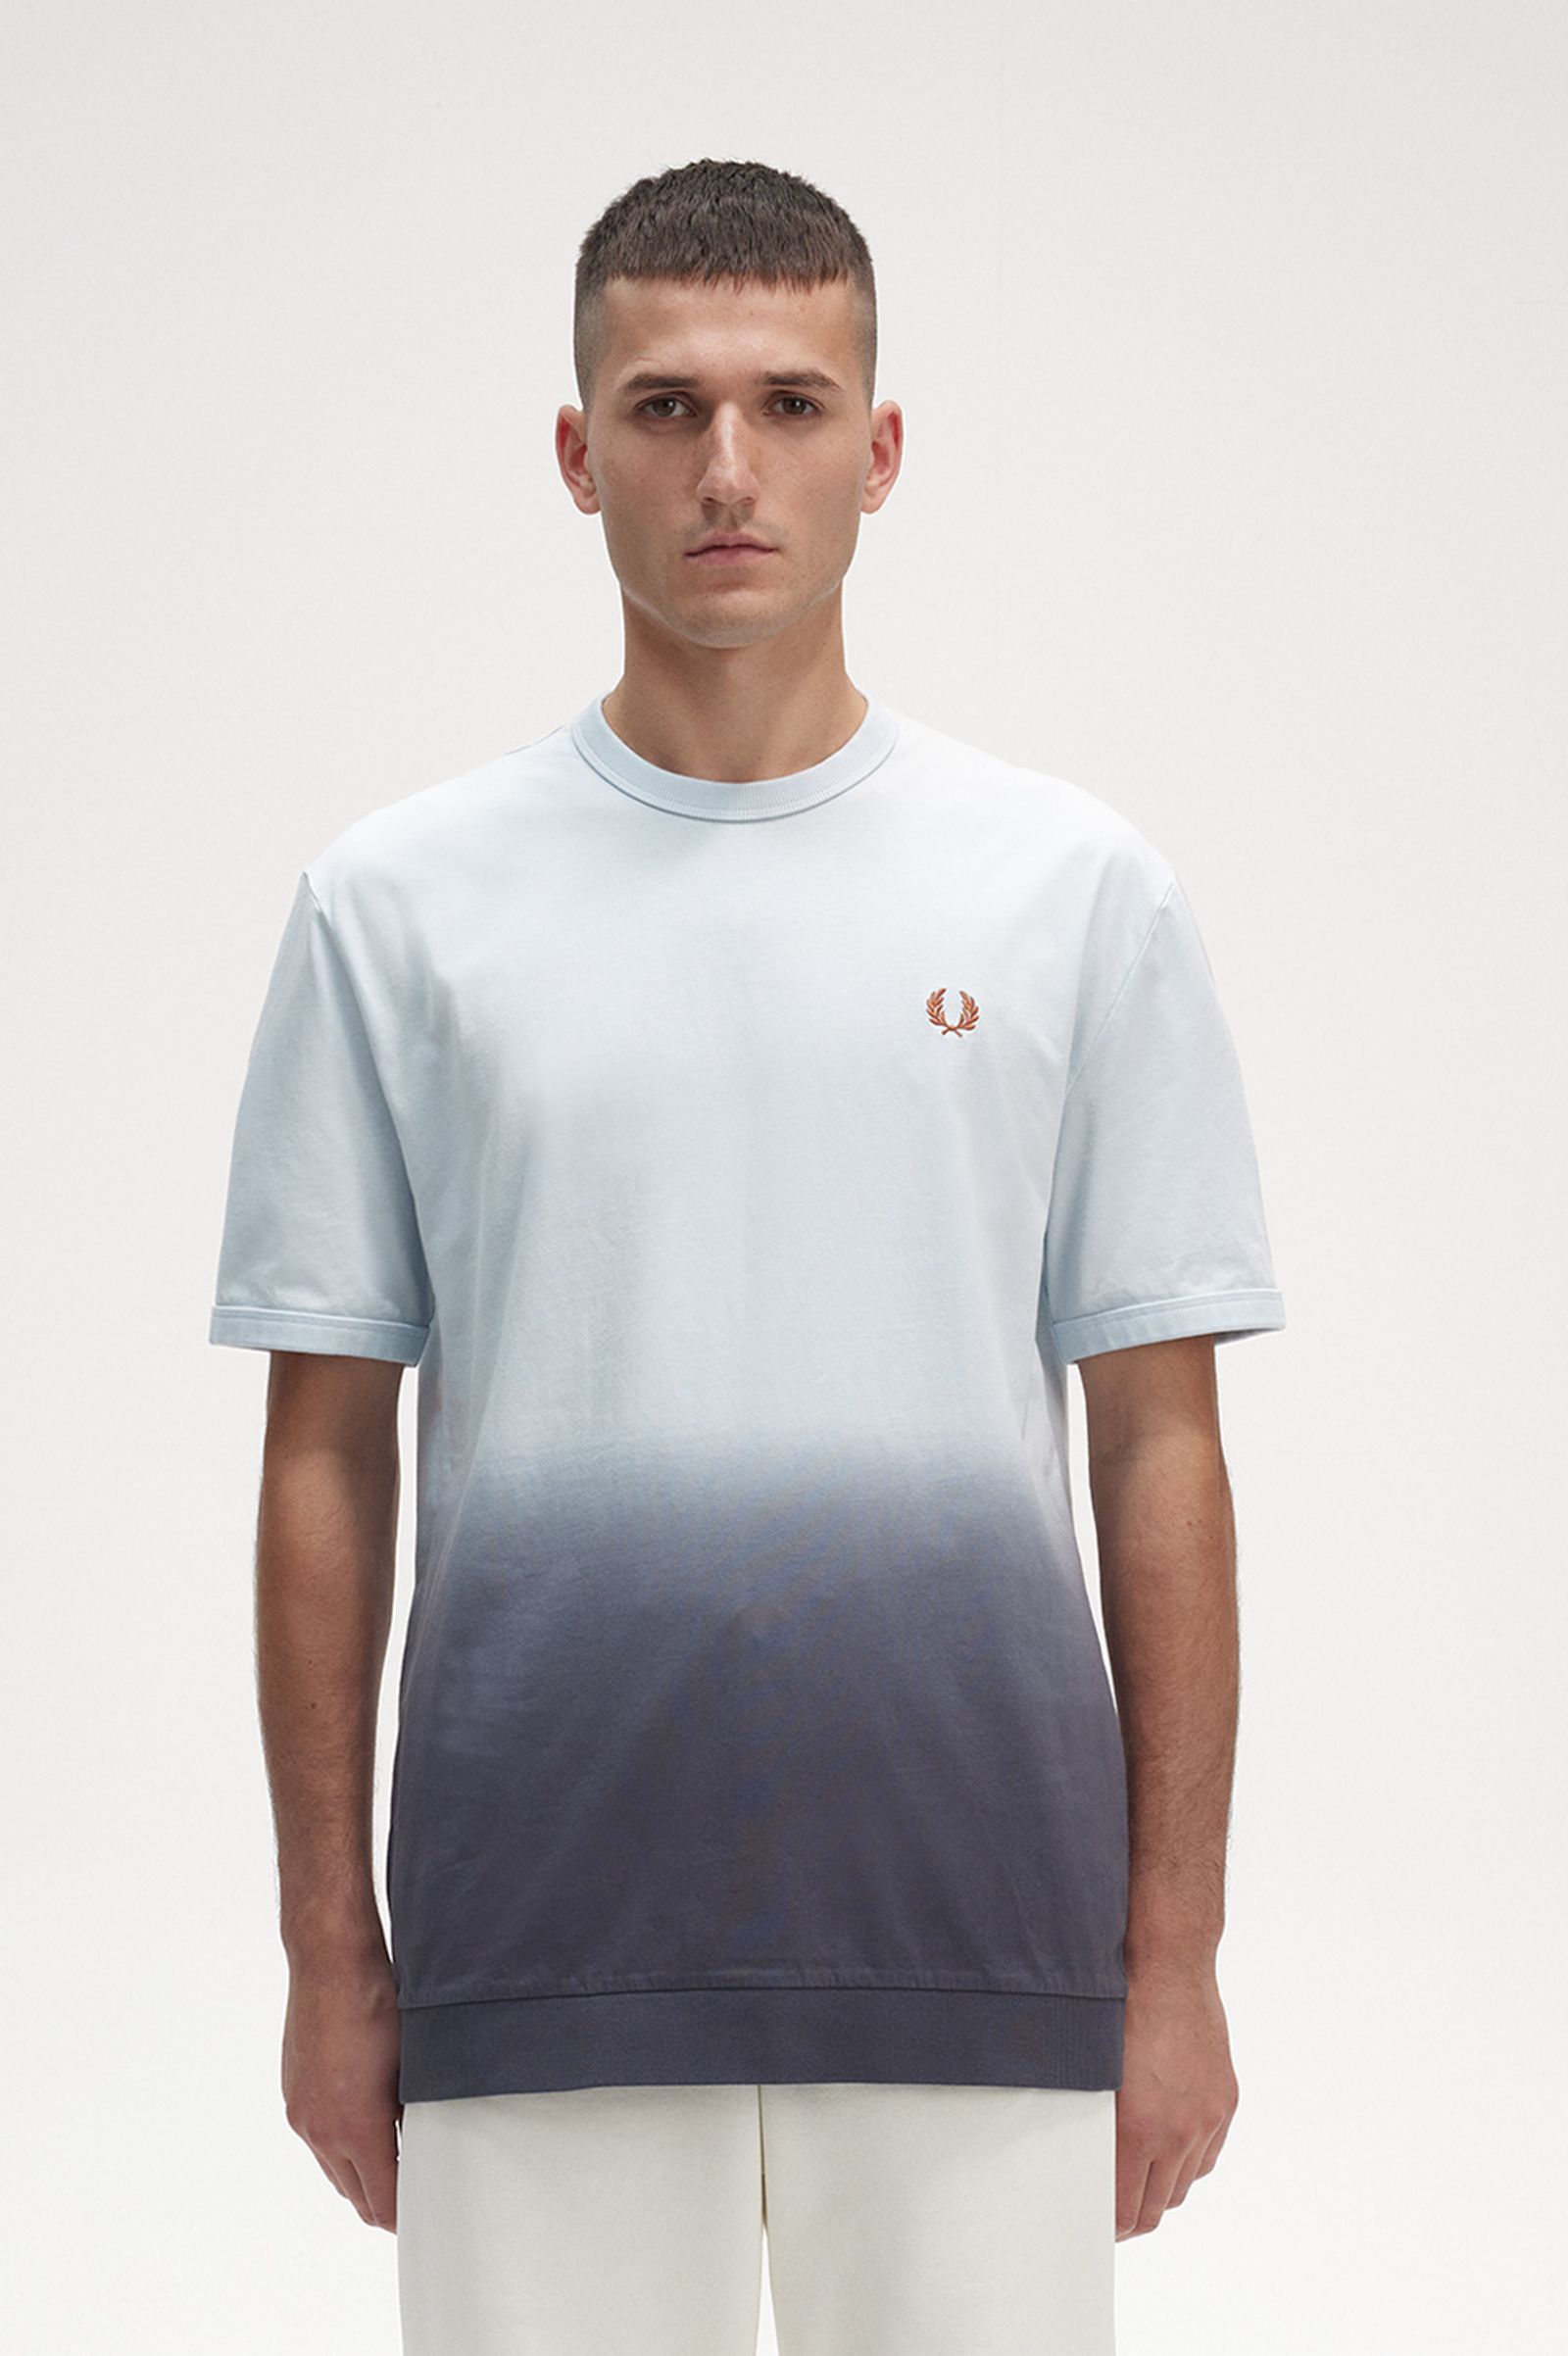 Fred perry taking a dip